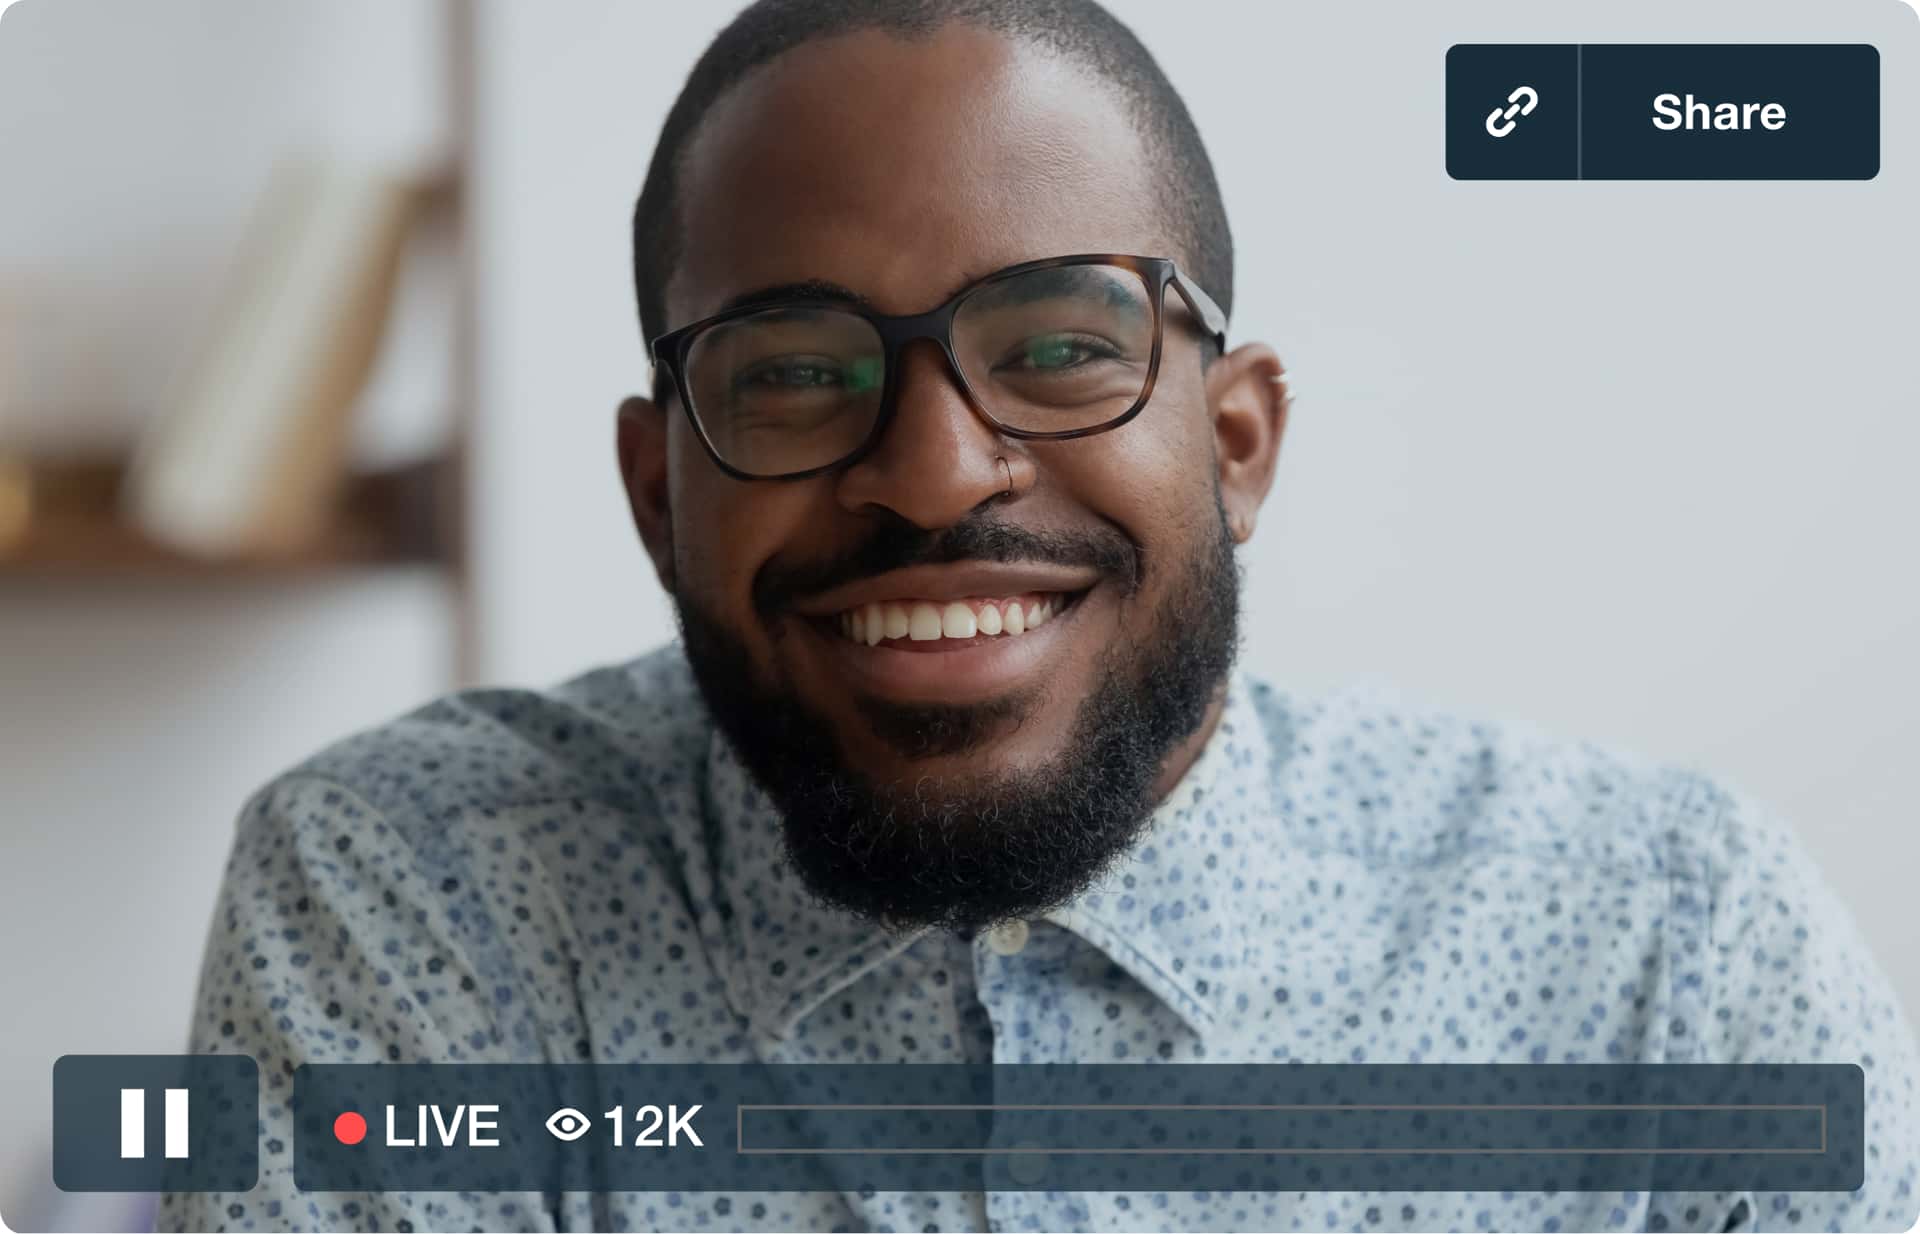 A man with glasses smiles at the camera during a live stream